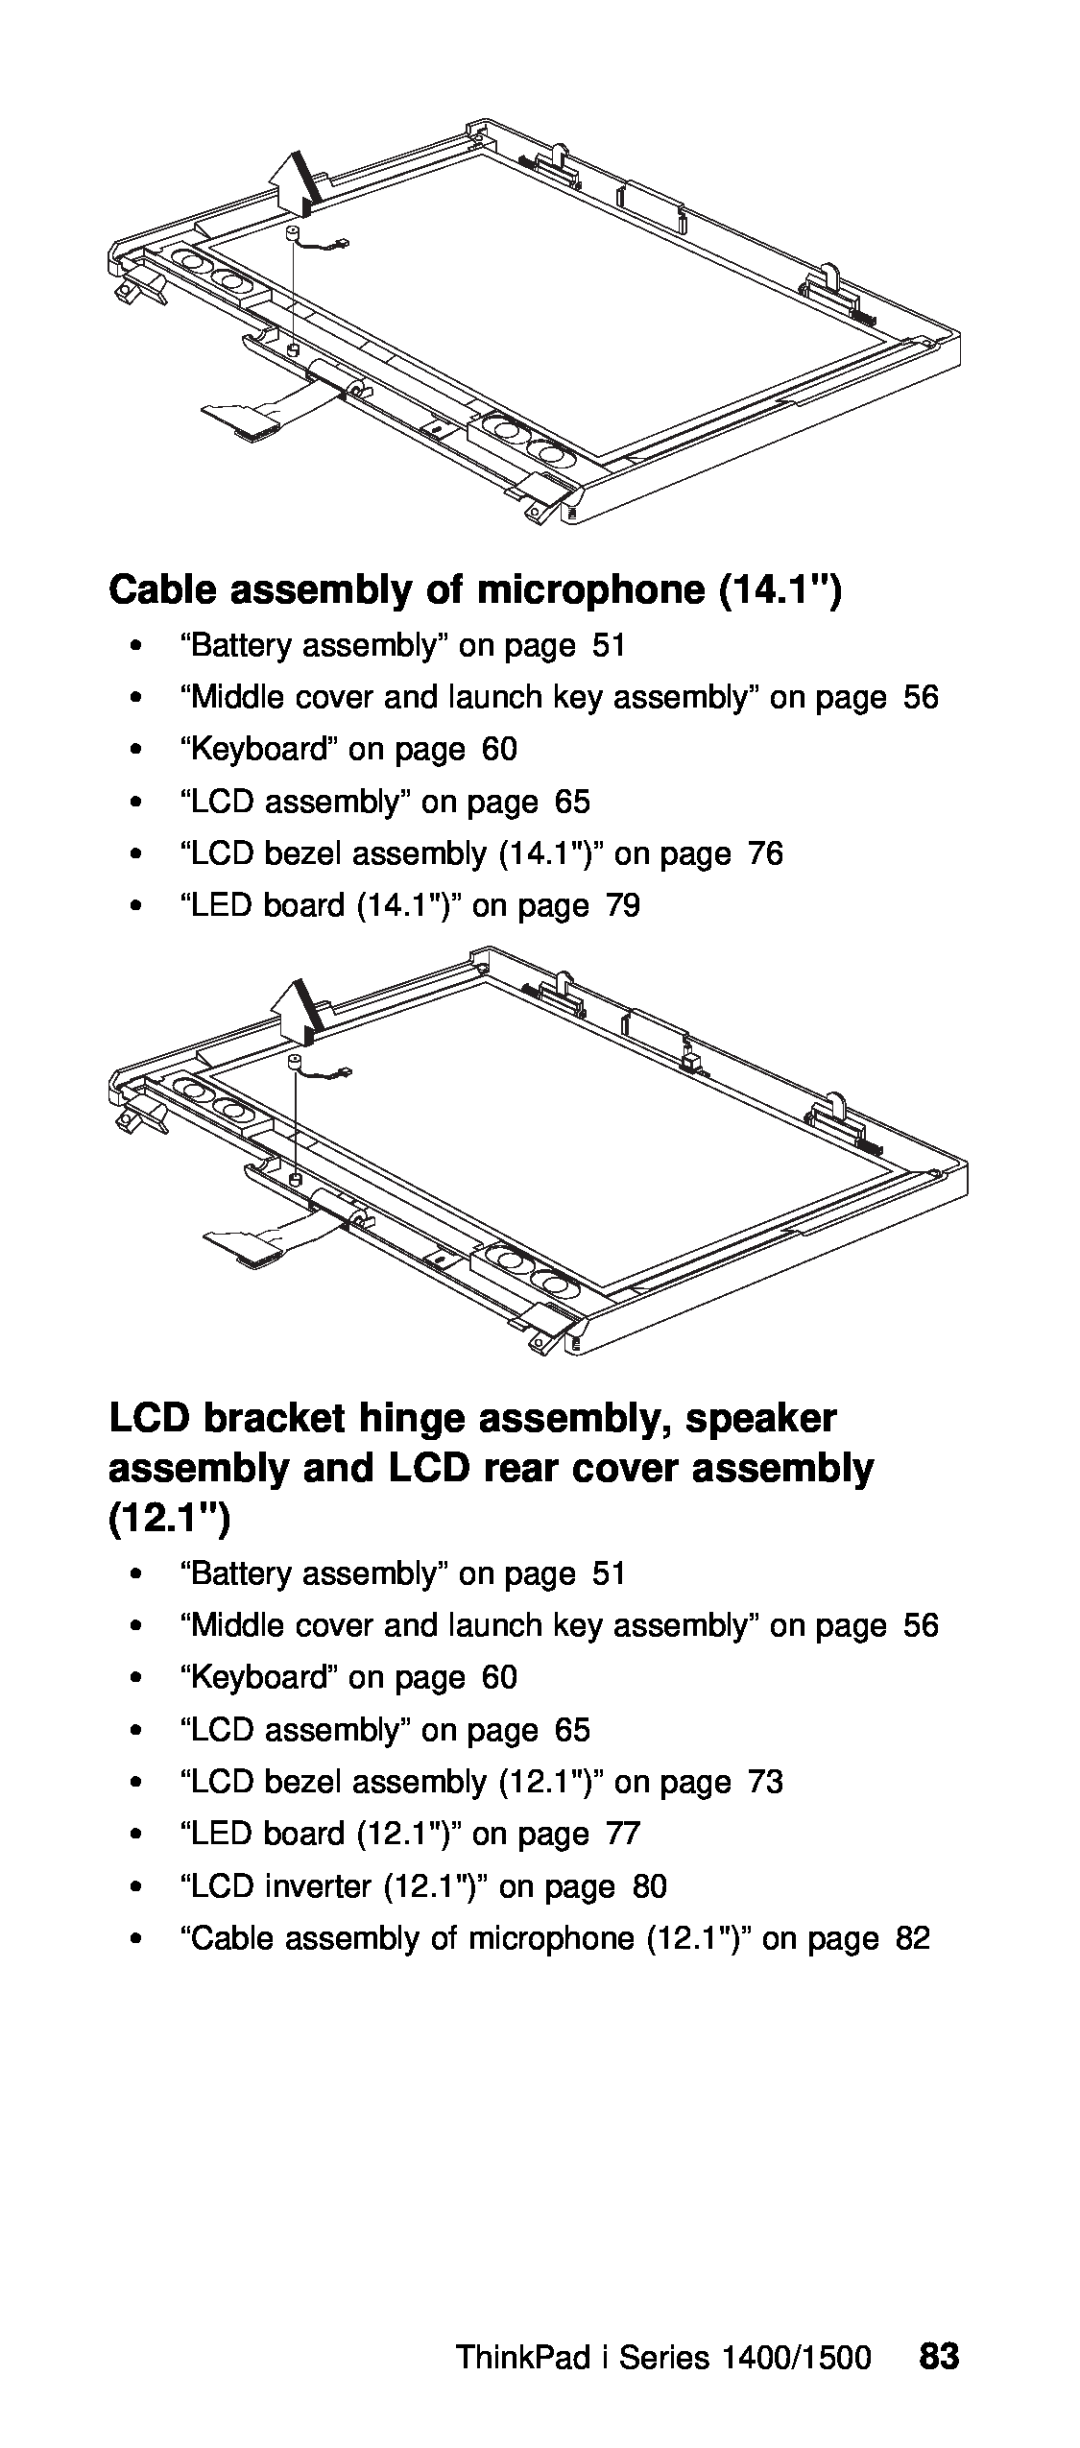 IBM Series 1400 hinge assembly, speaker, assembly and LCD rear cover assembly, LCD bracket, Cable assembly of microphone 